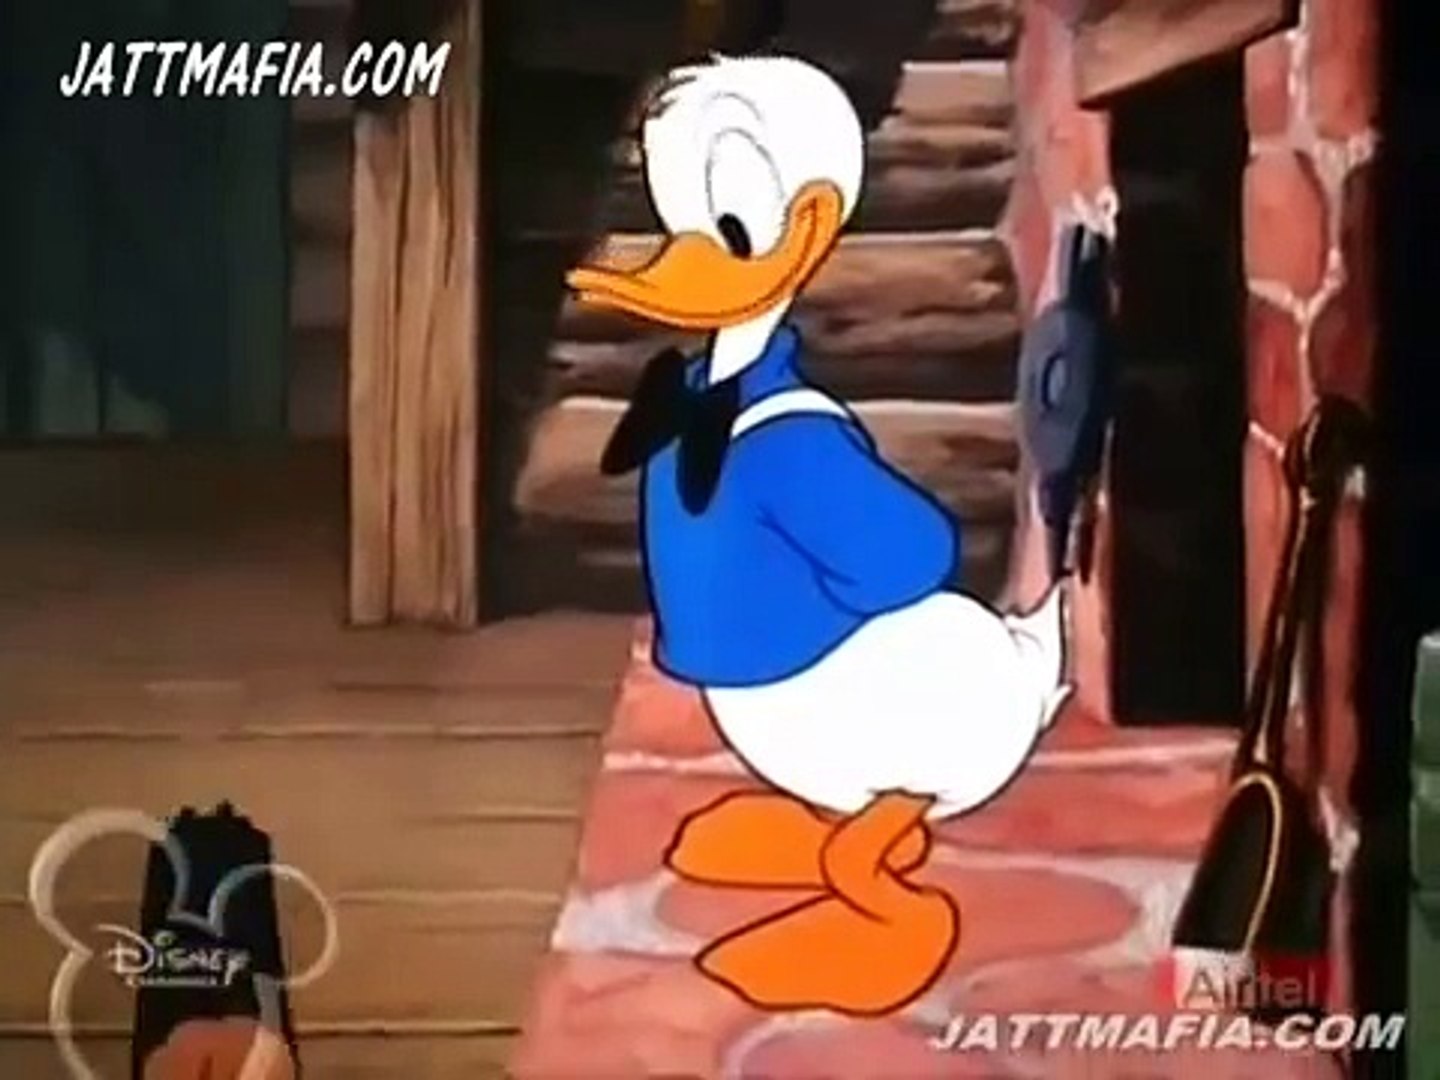 HINDI DONALD DUCK OLD COLLECTION PART 2 - Dailymotion Video